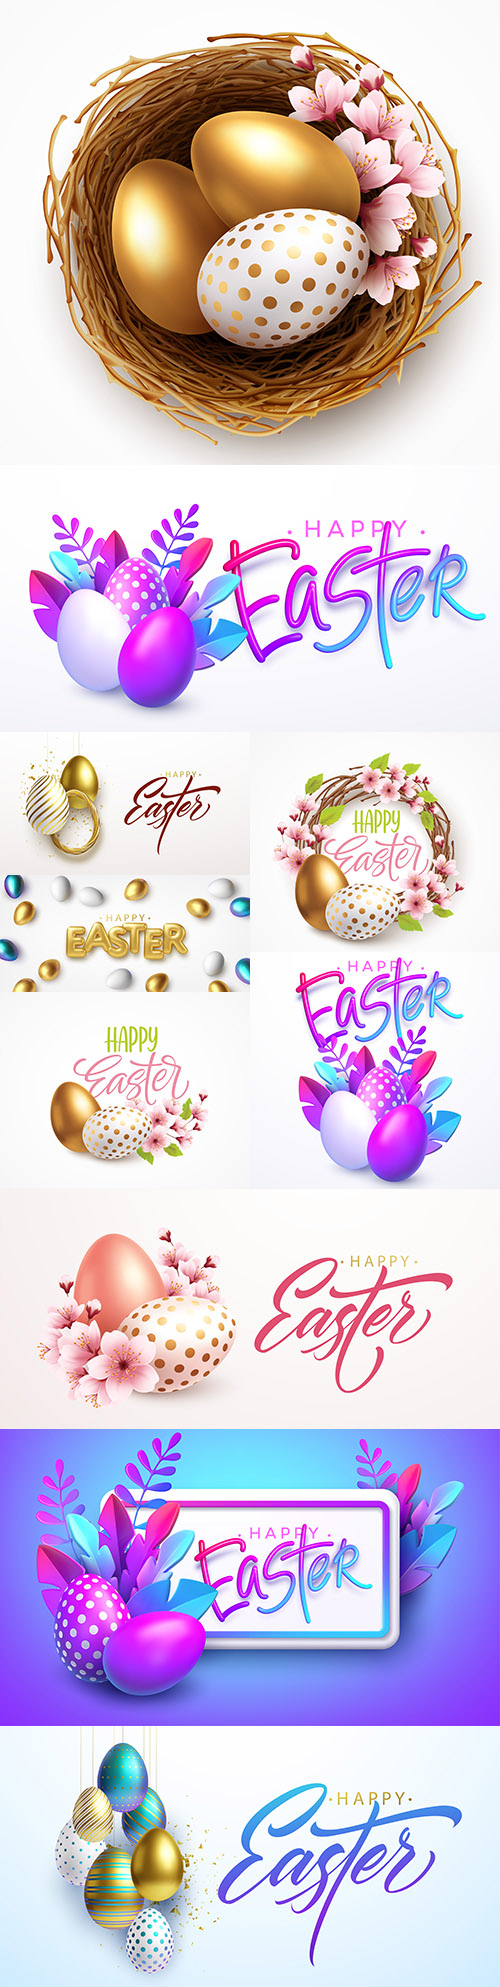 Happy Easter background with realistic eggs and spring flowers
